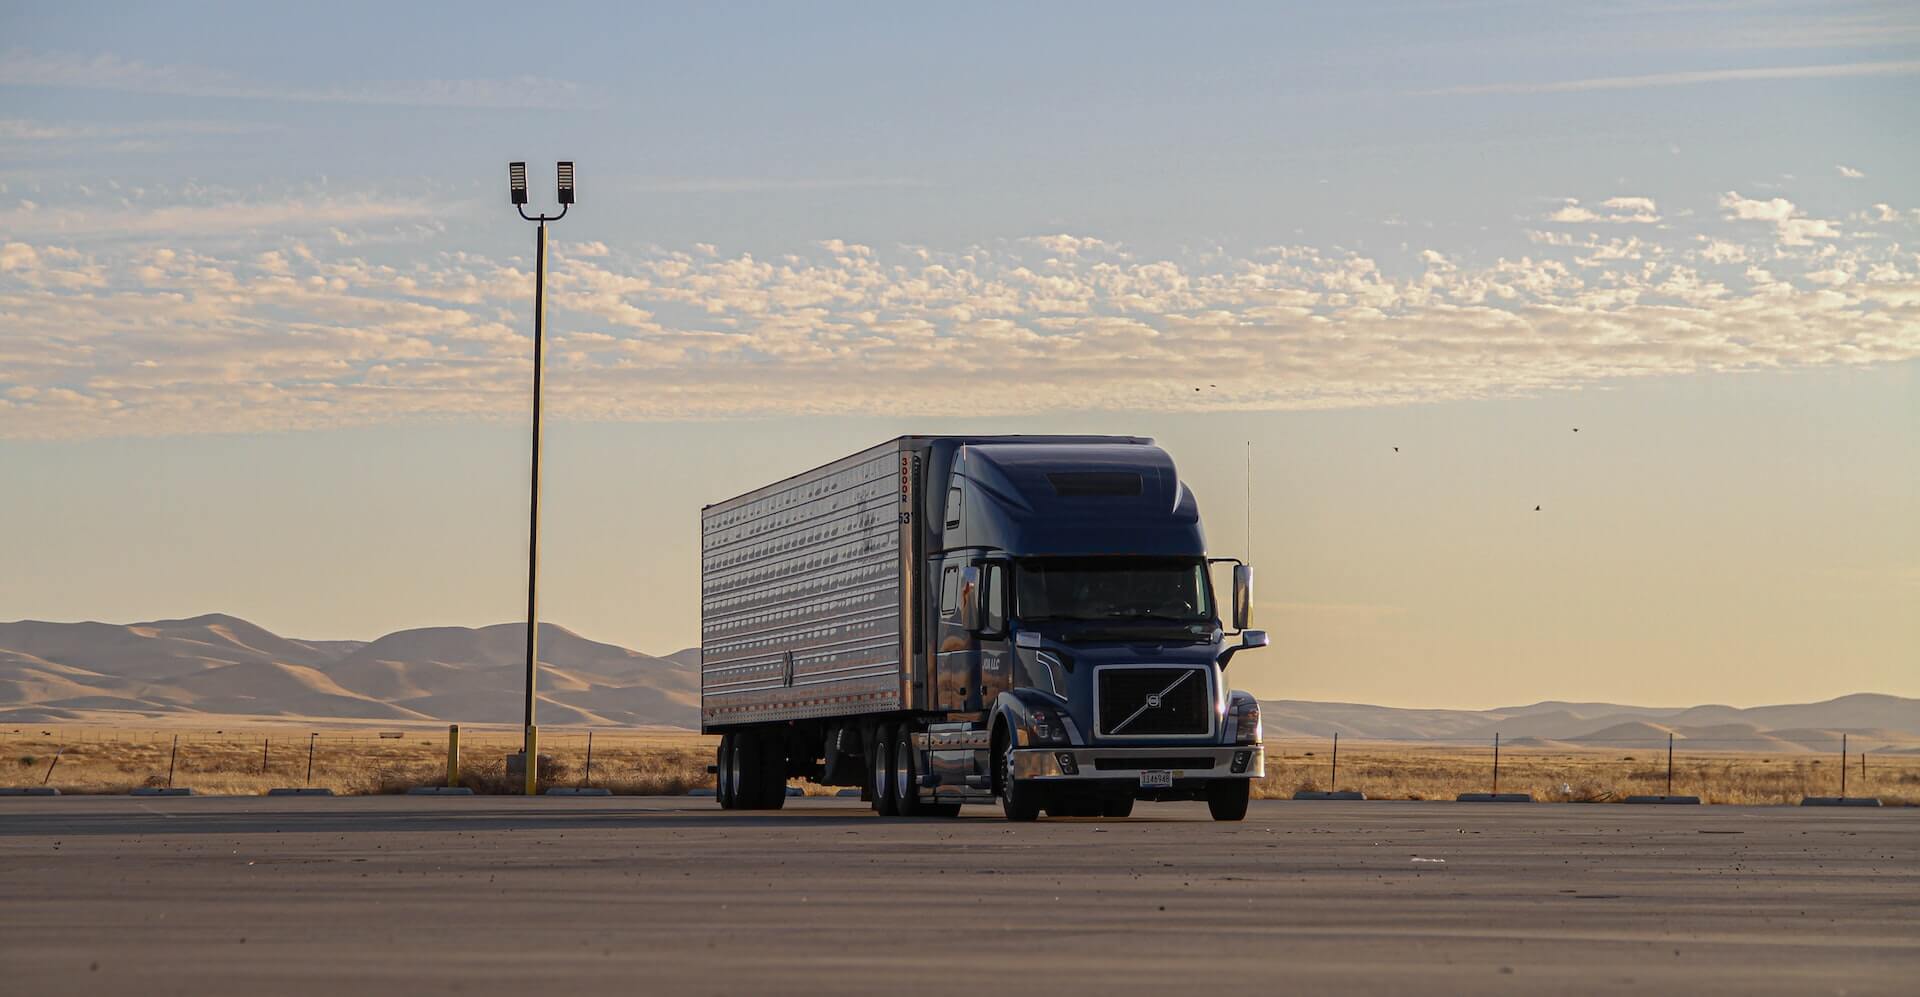 A freight truck with trailer parked in an empty parking lot just before dusk with low rolling brown hills in the distance.